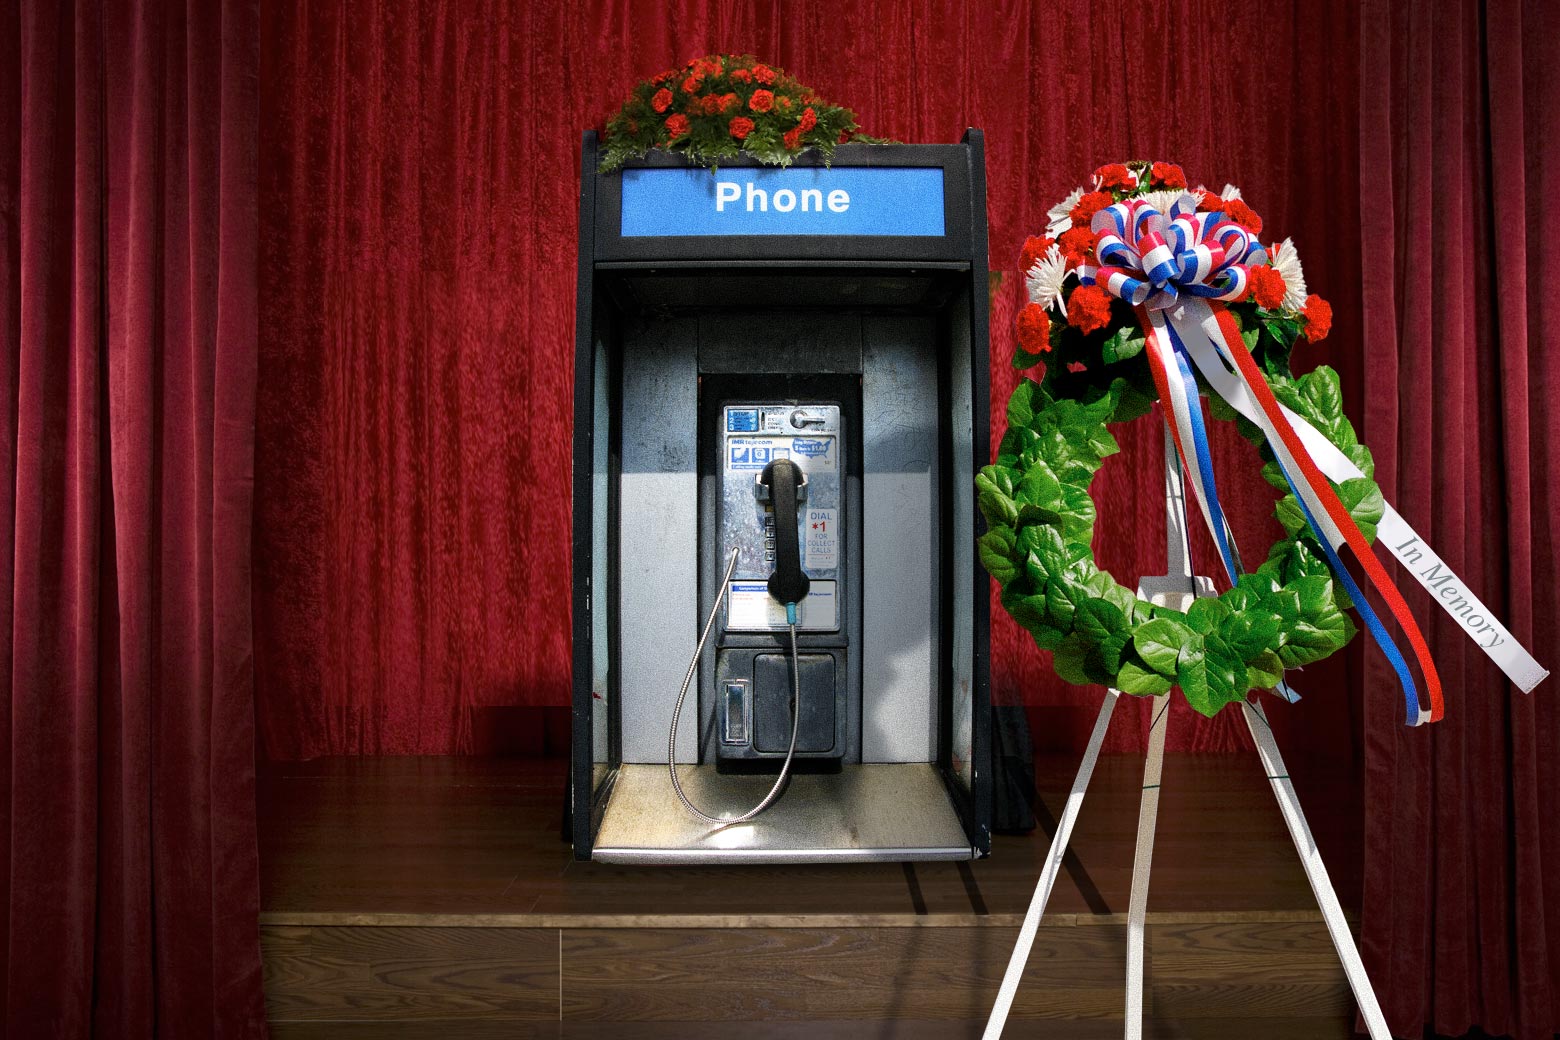 A payphone in front of a curtain, as in a funeral home, next to a funeral wreath.